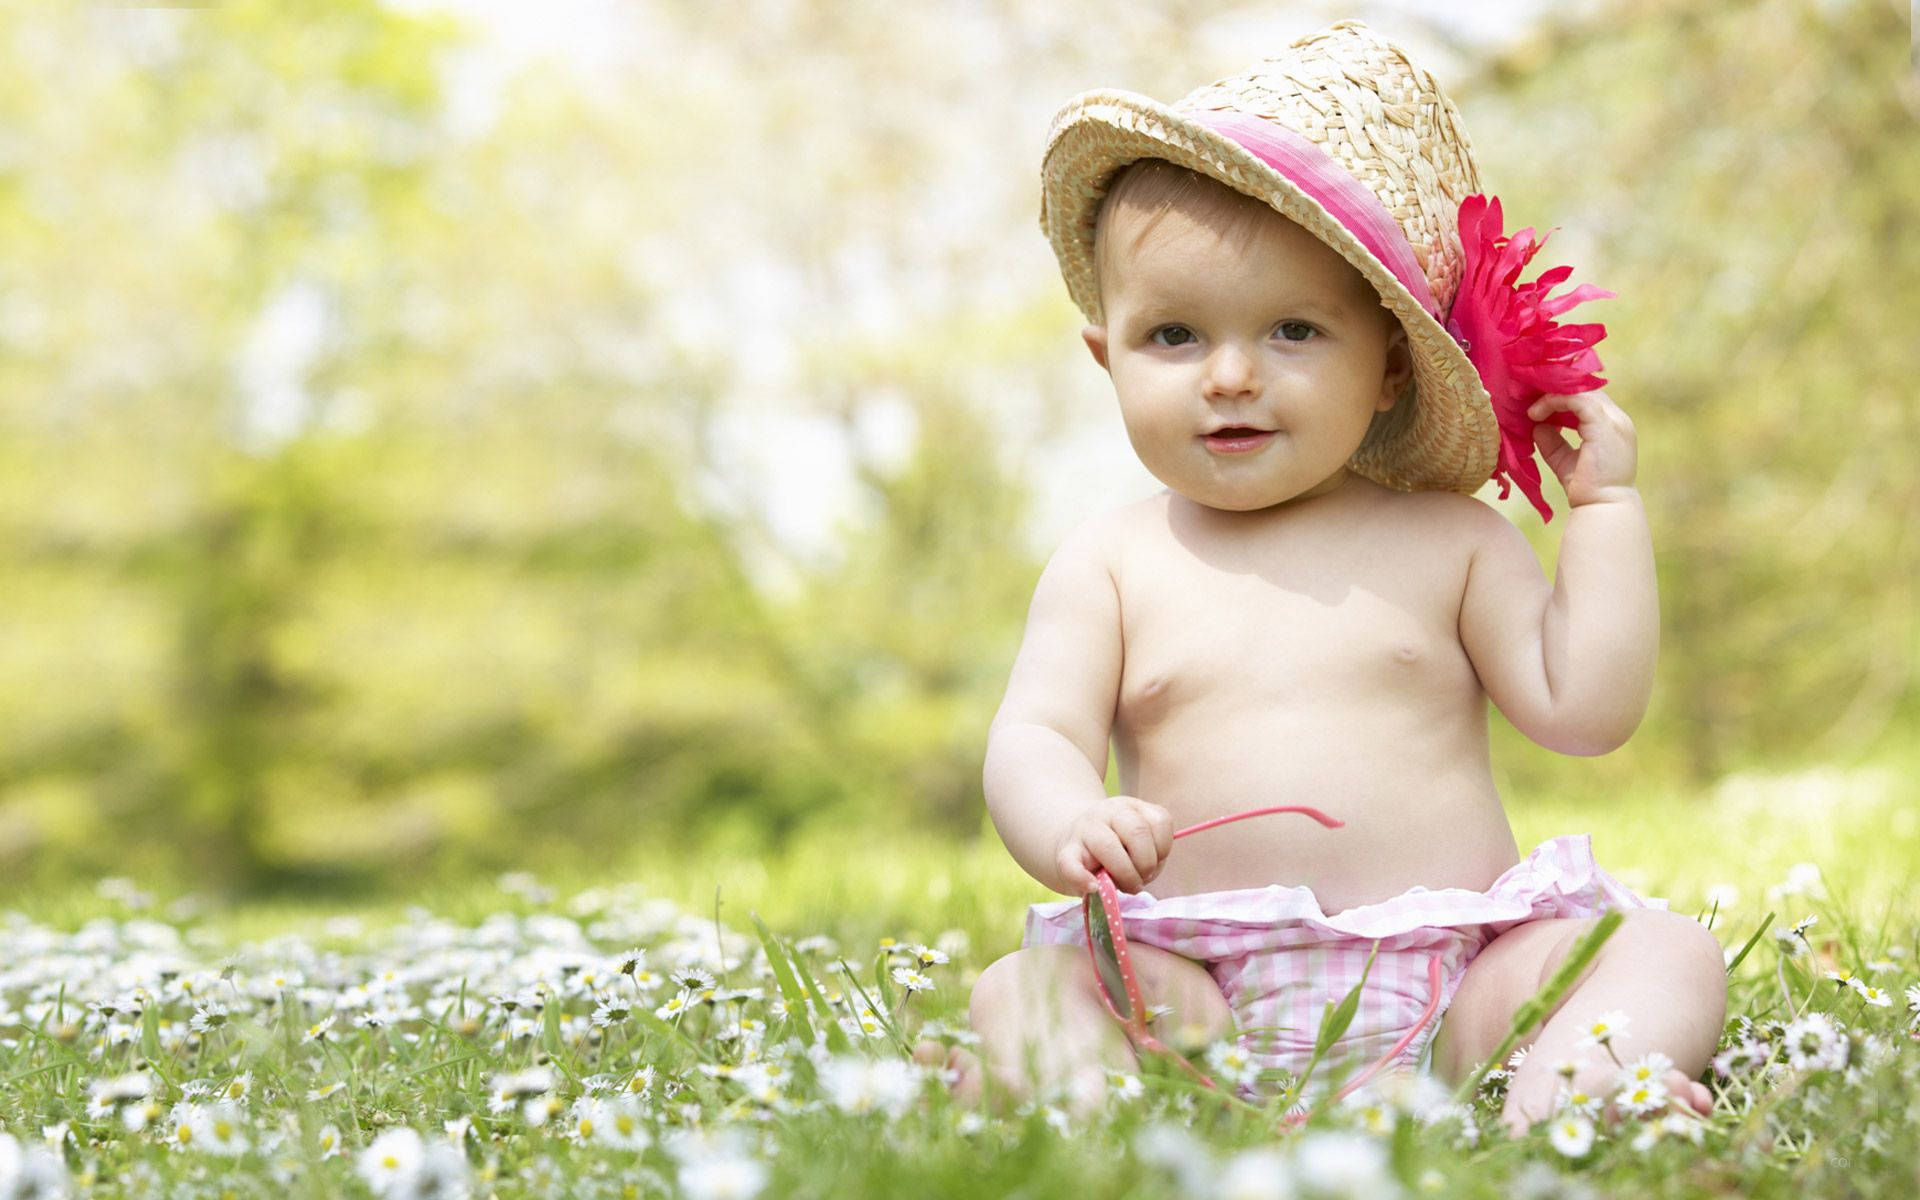 A Beautiful Baby Boy Enjoying The Summertime In A White Daisy-filled Field. Background